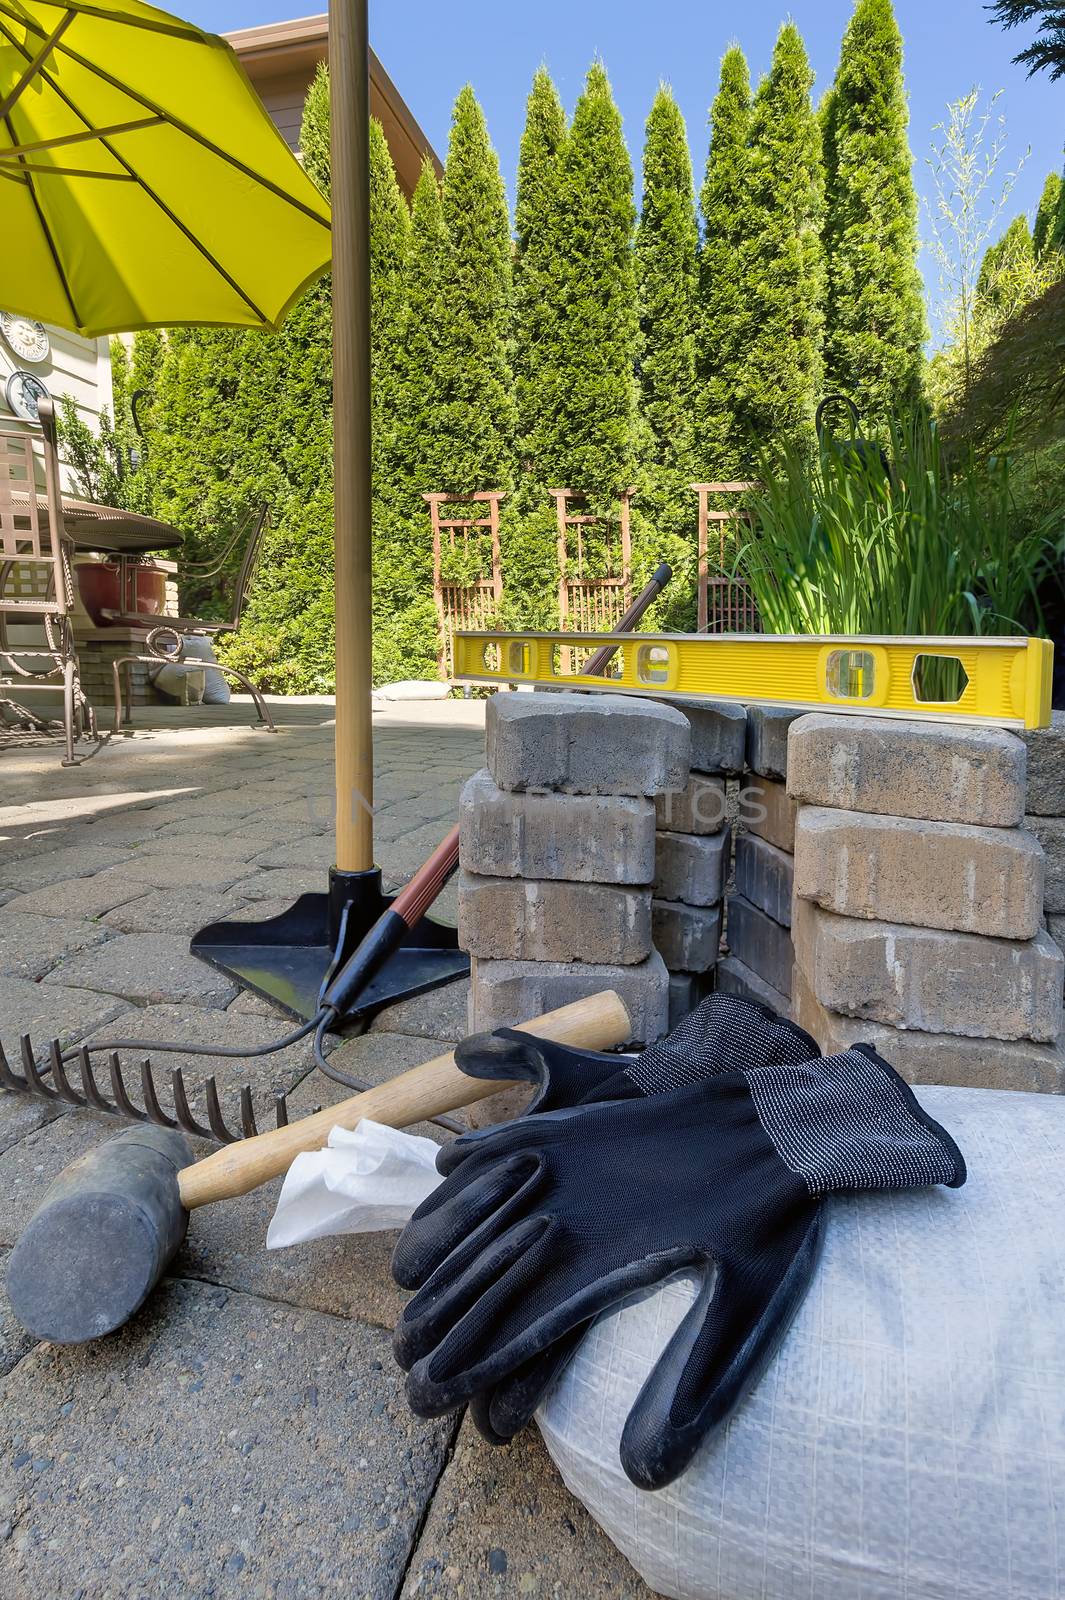 Stone Bricks Pavers for backyard patio hardscape with garden landscaping tools gloves level rubber mallet sand gravel tamper and plants